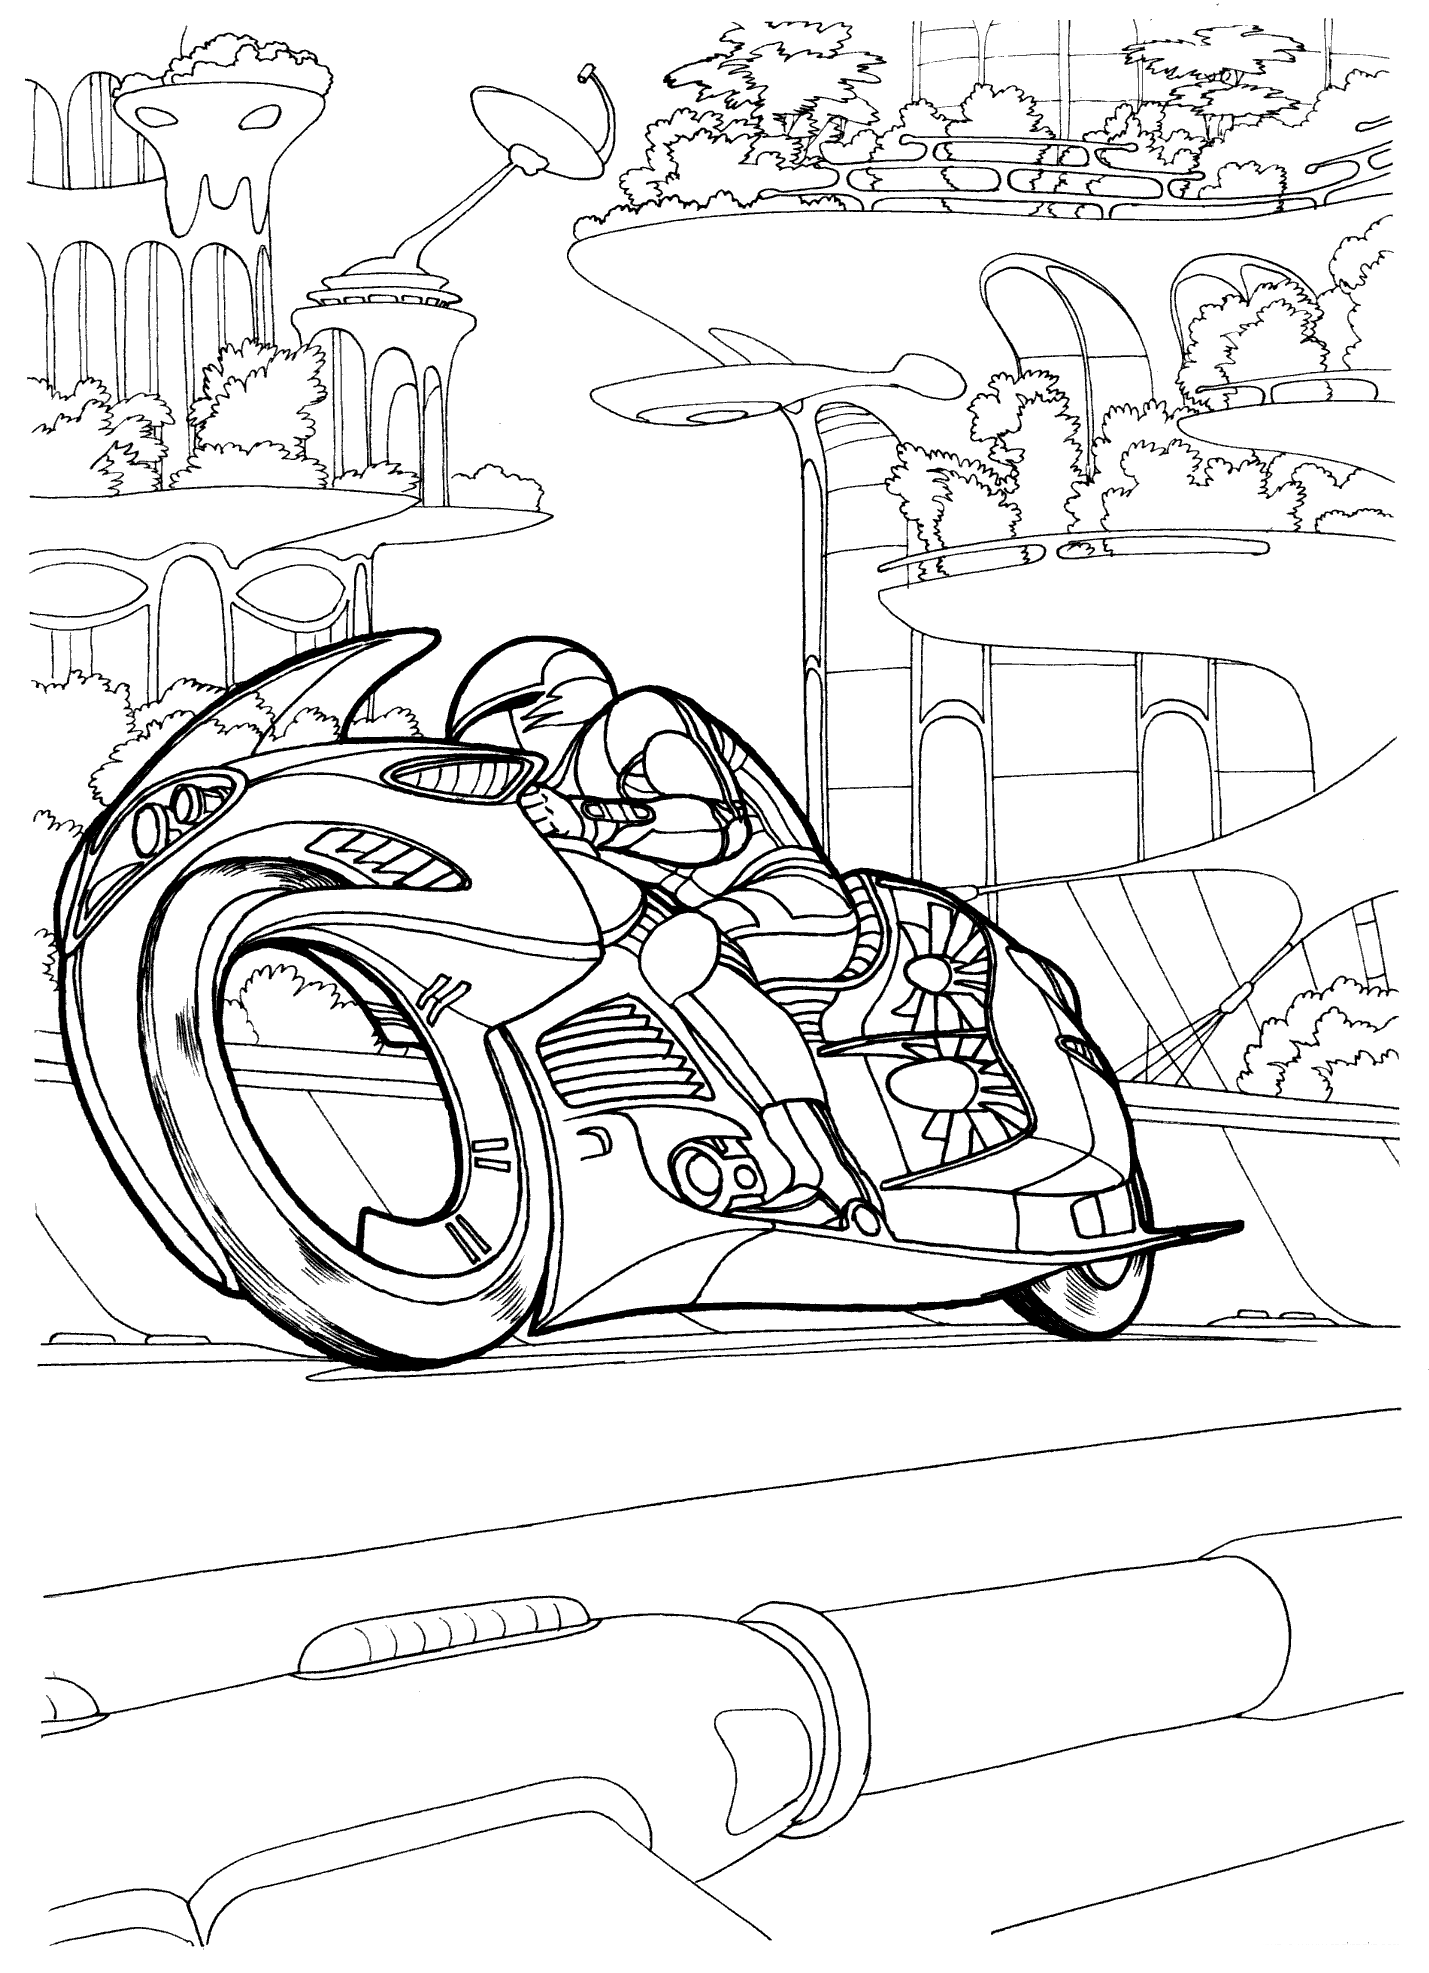 Coloring page - A prototype motorcycle